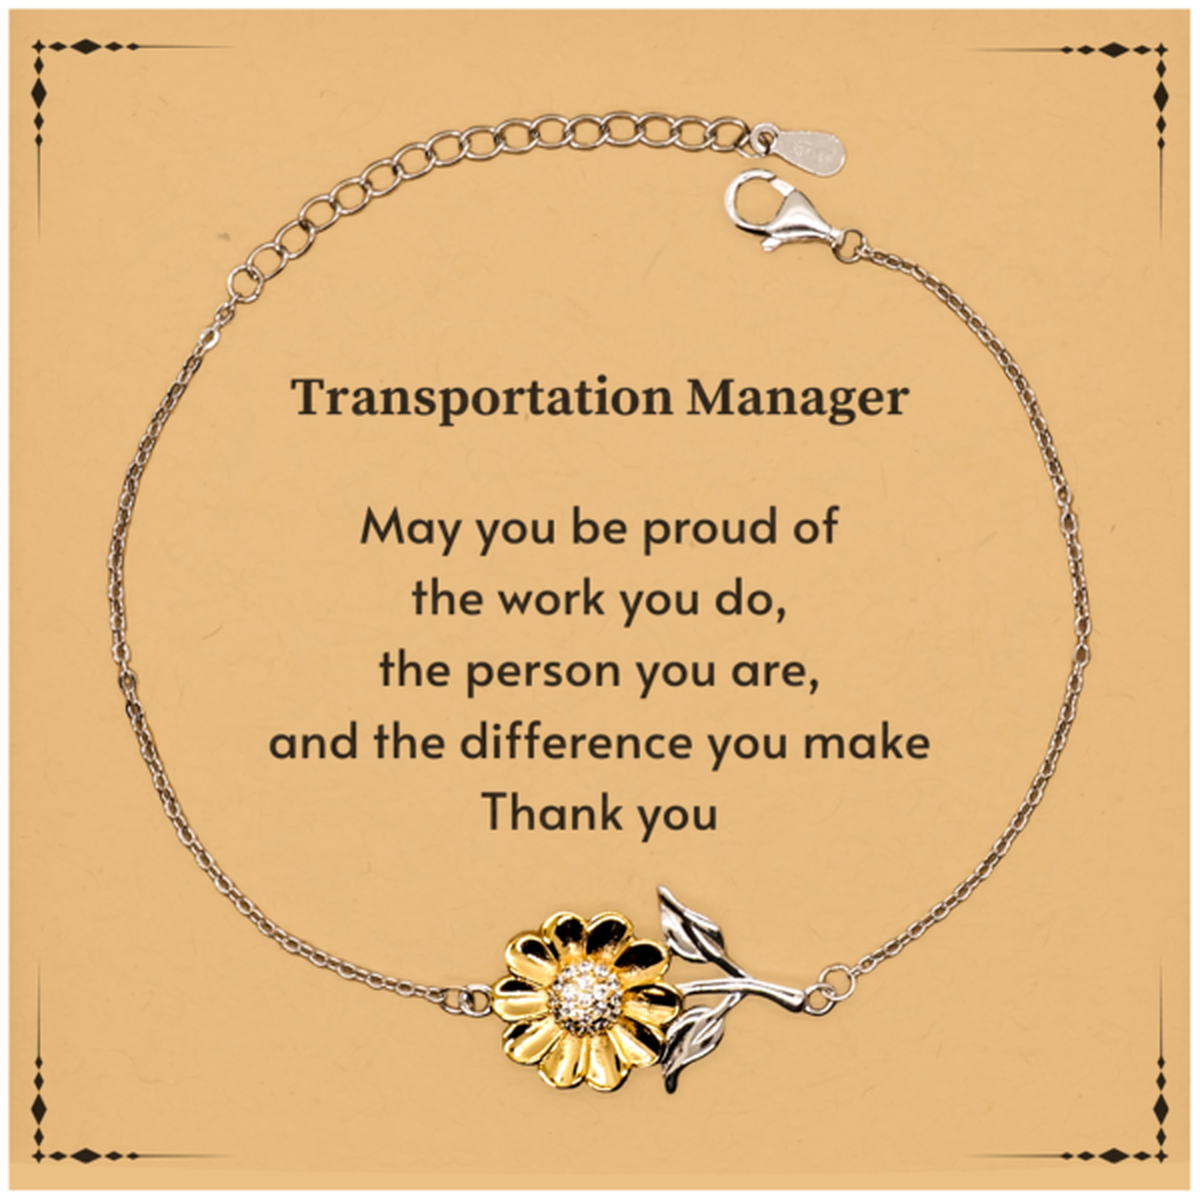 Heartwarming Sunflower Bracelet Retirement Coworkers Gifts for Transportation Manager, Transportation Manager May You be proud of the work you do, the person you are Gifts for Boss Men Women Friends